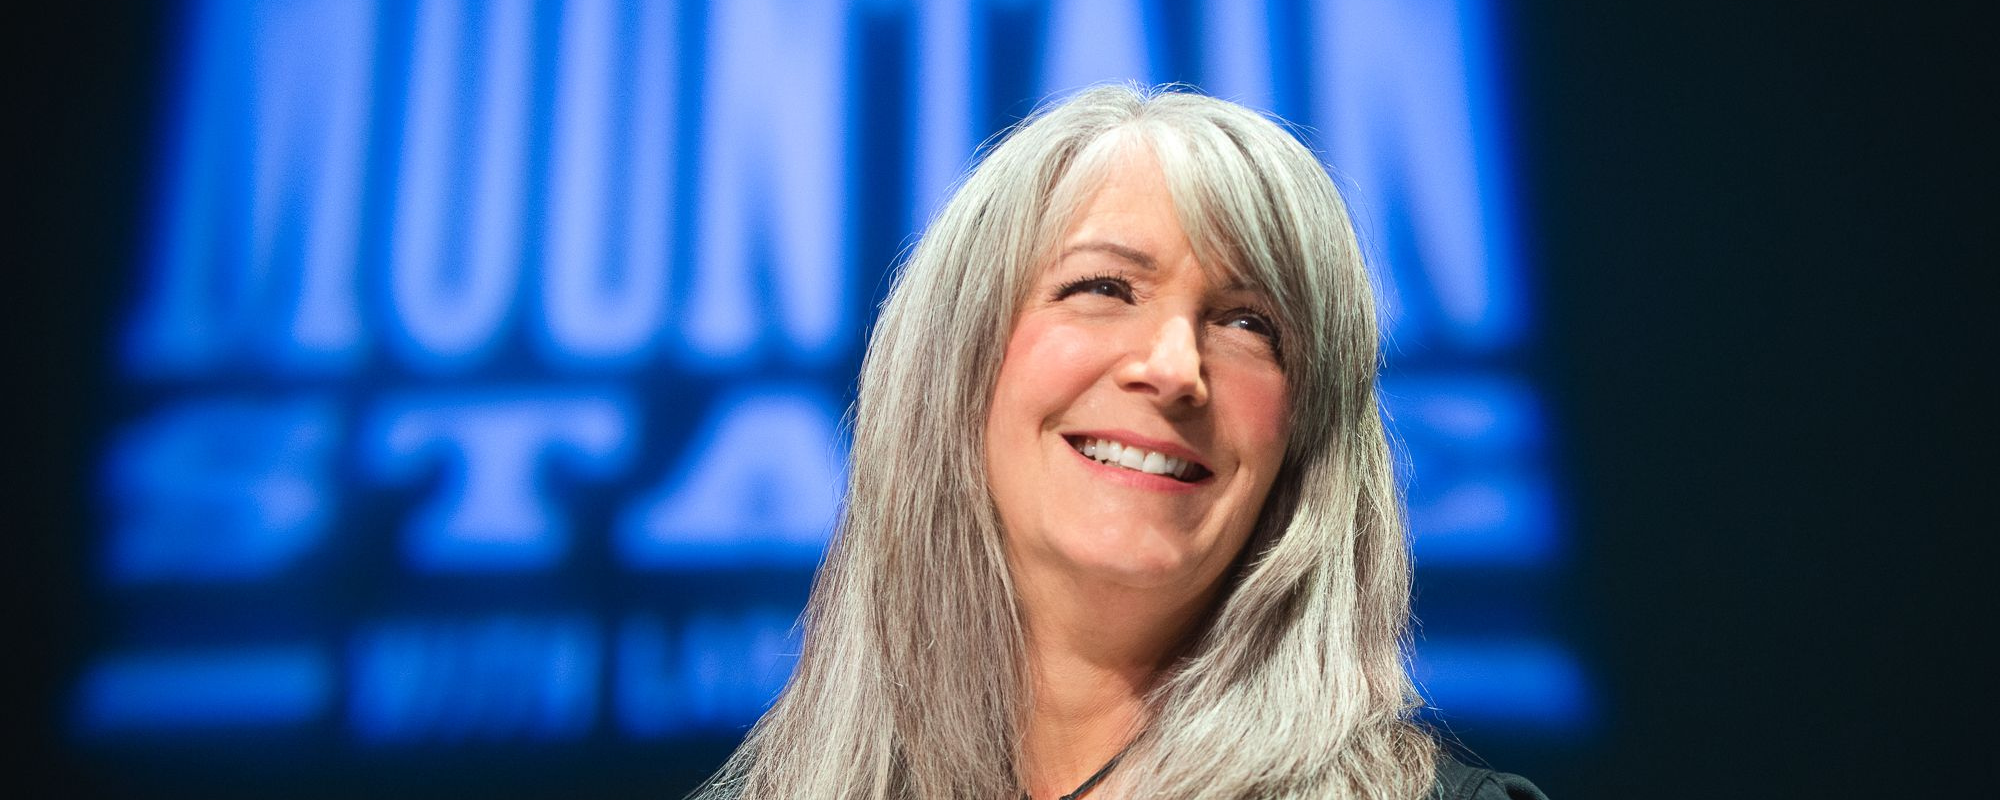 Kathy Mattea Settles Into New Post as Host Of ‘Mountain Stage’